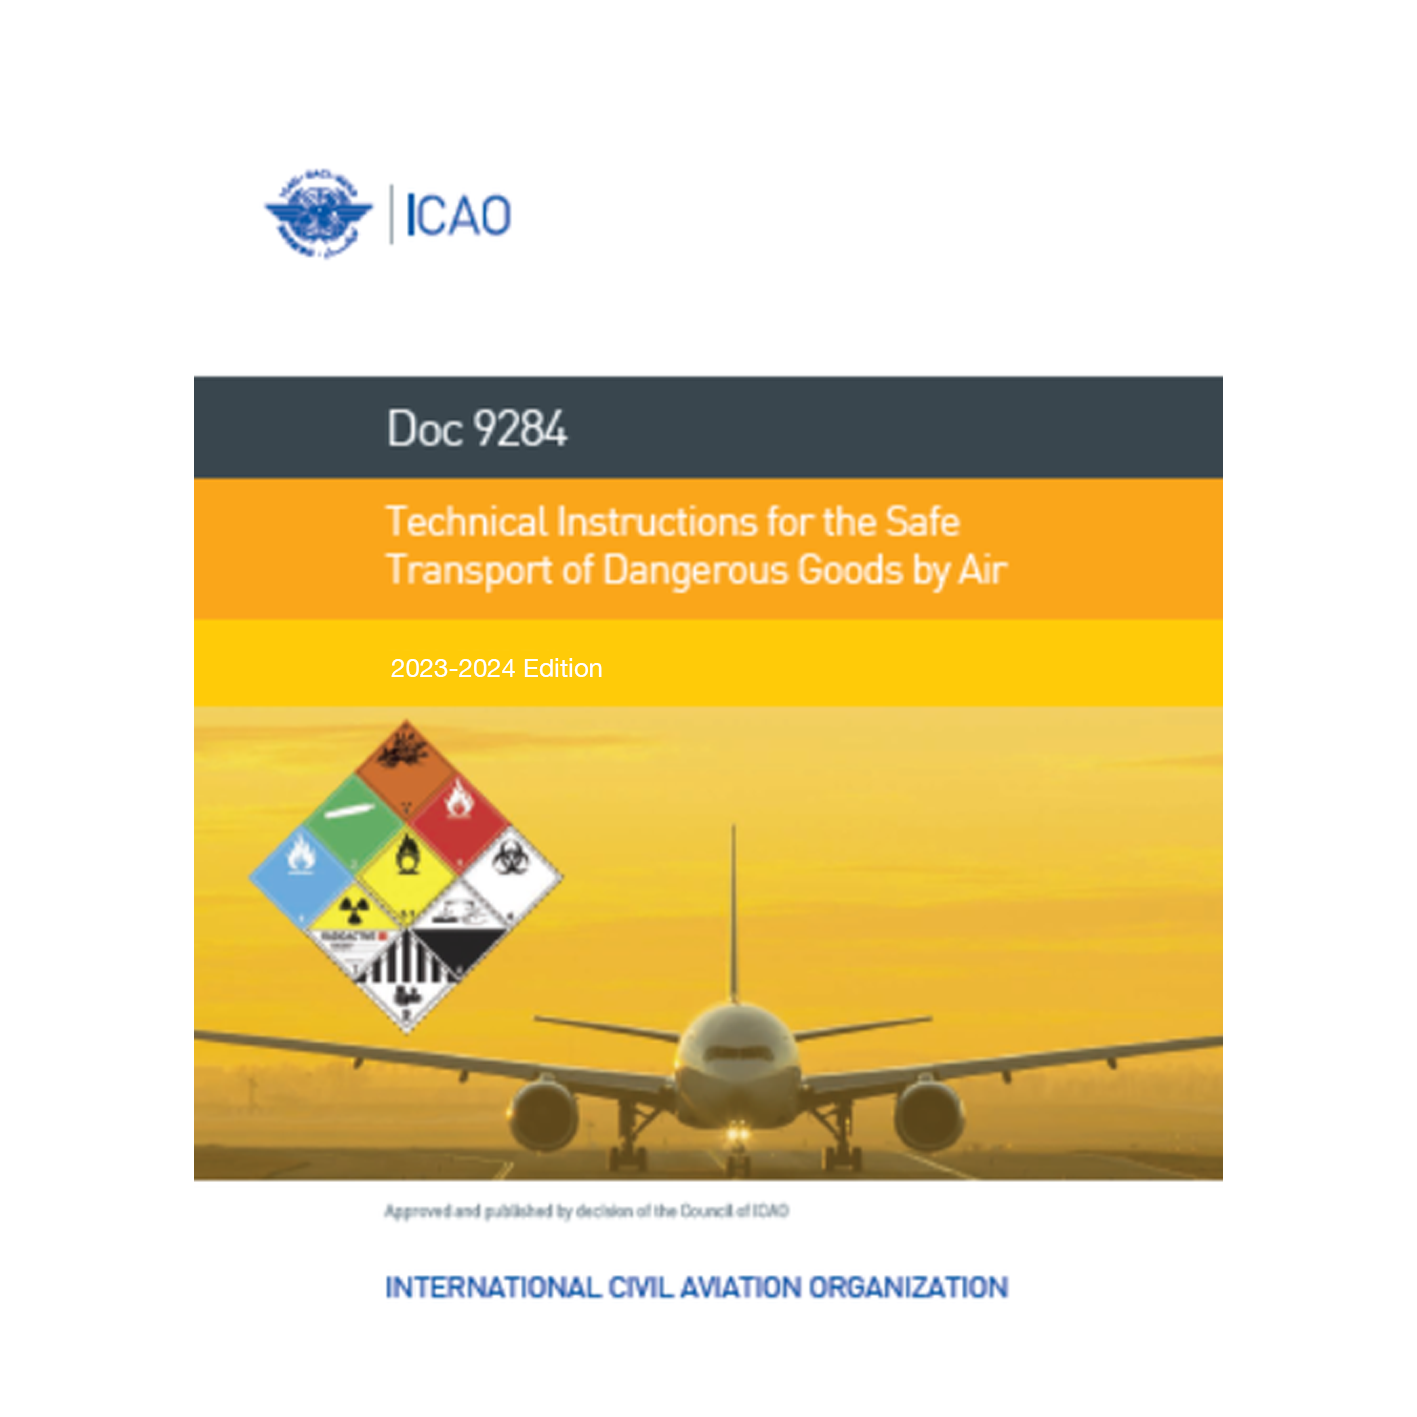 ICAO - Technical Instructions for the Safe Transport of Dangerous Goods by Air, 2023-2024 Edition